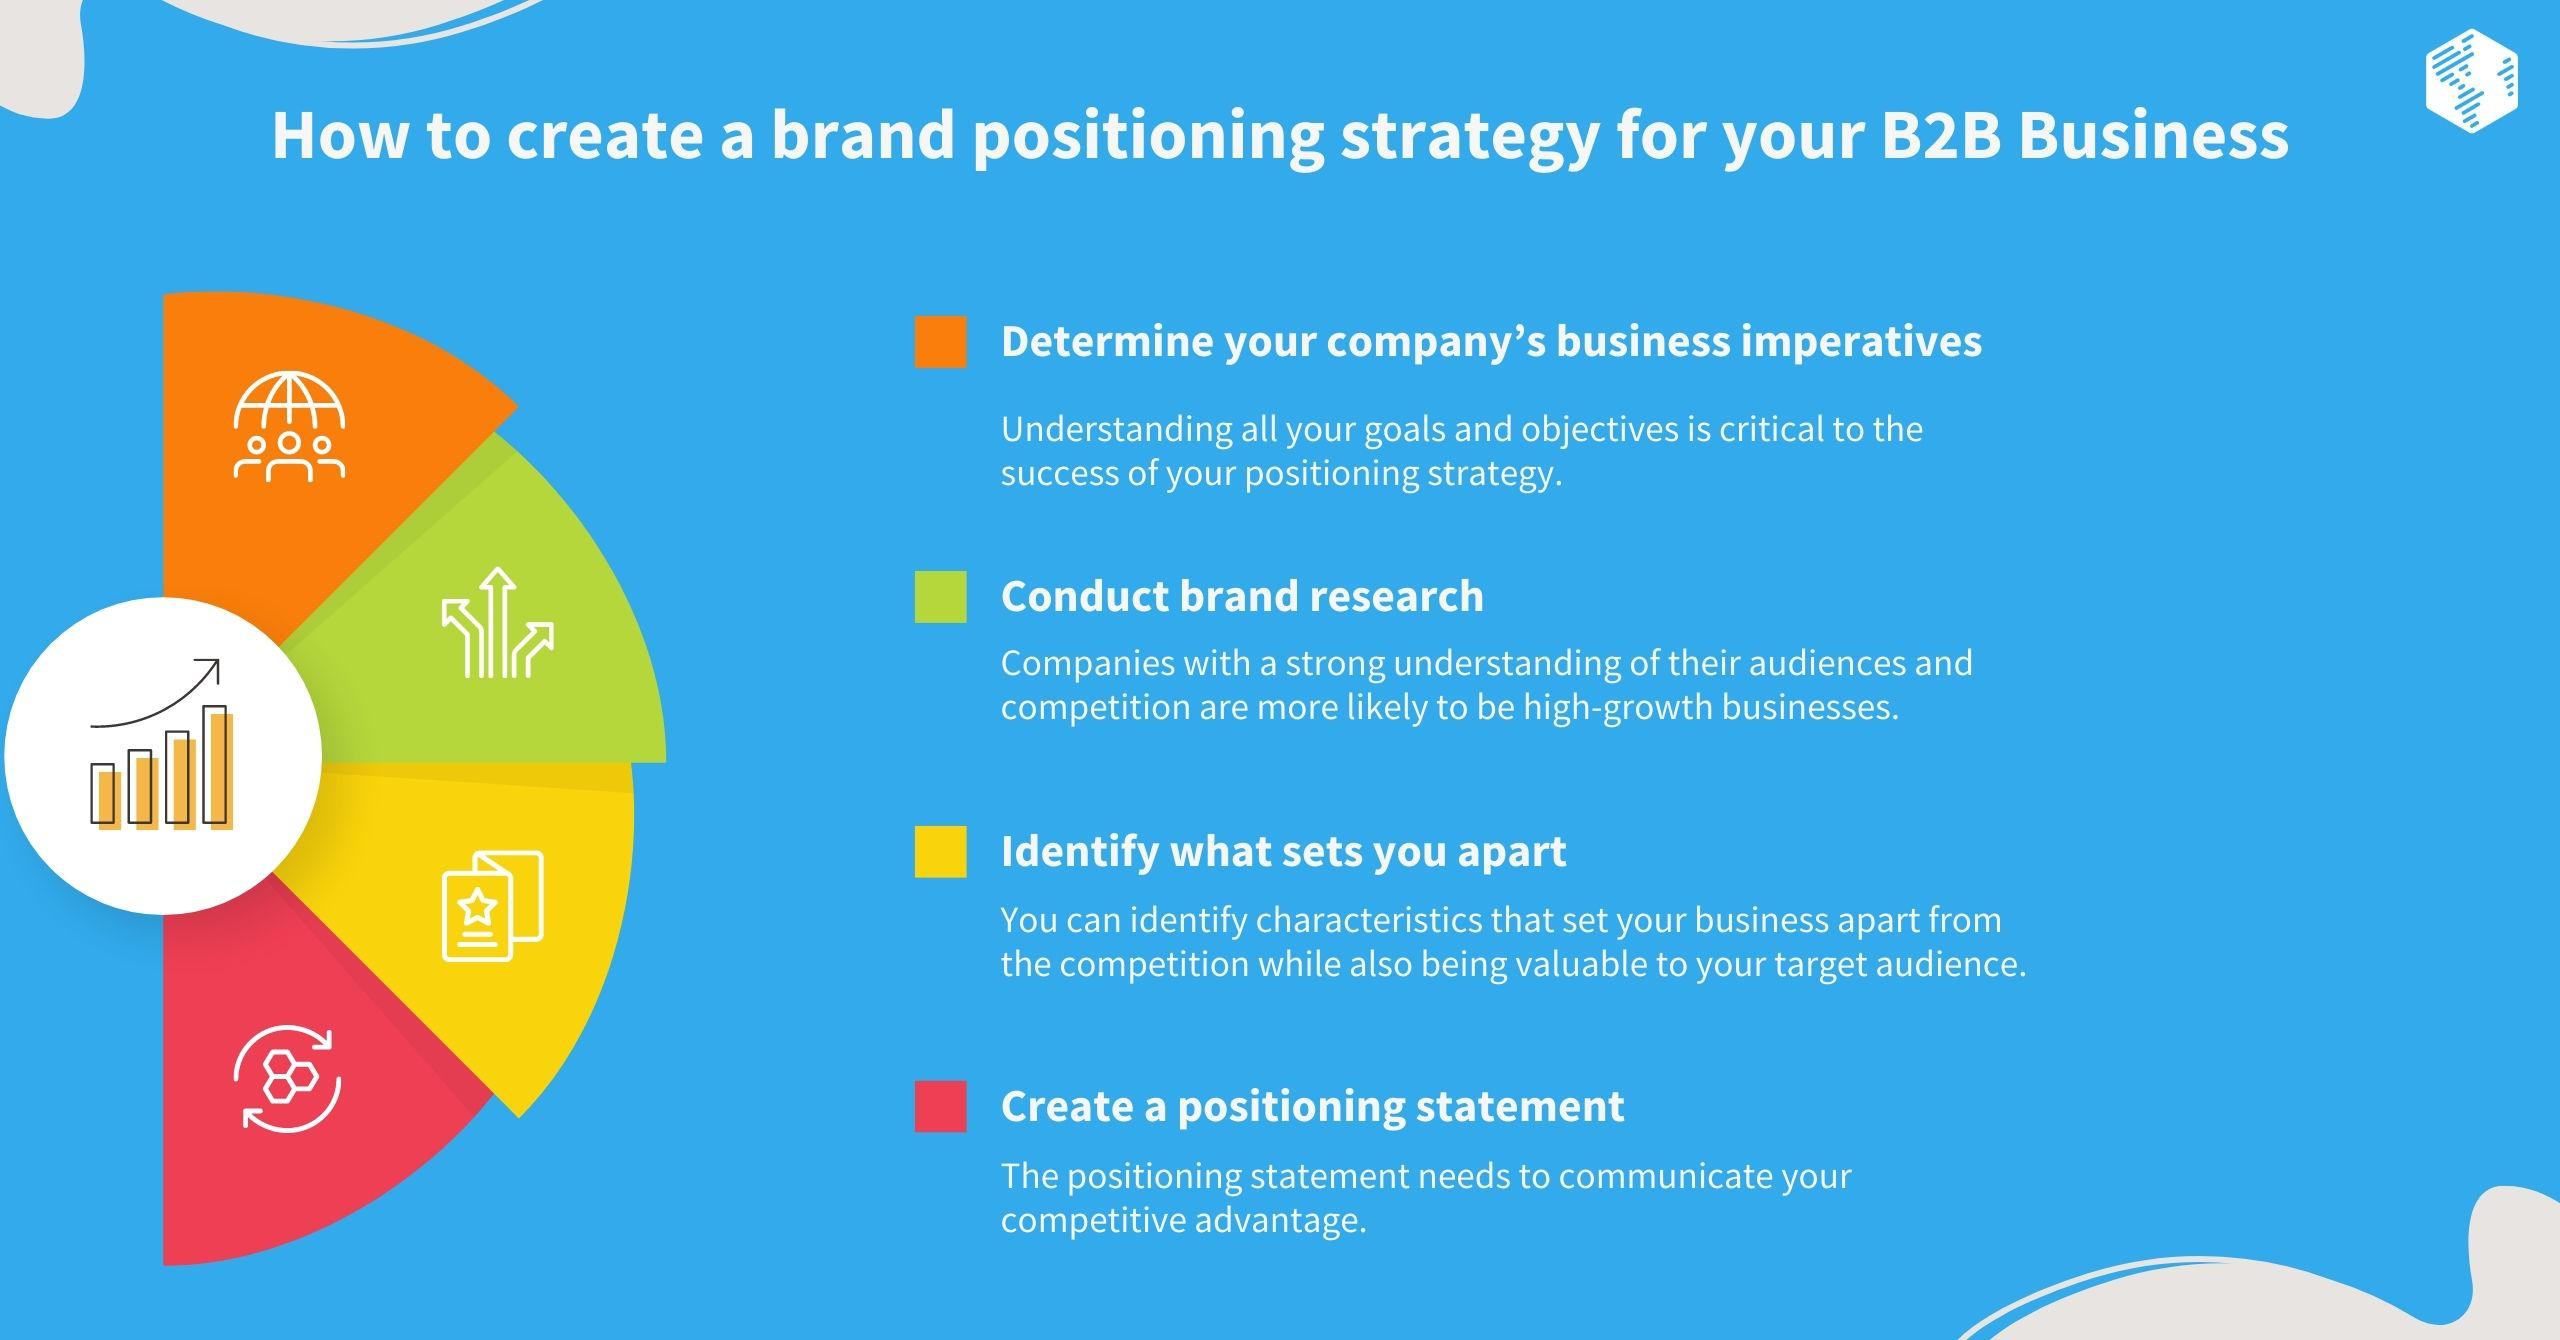 How to create a brand positioning strategy for your B2B Business